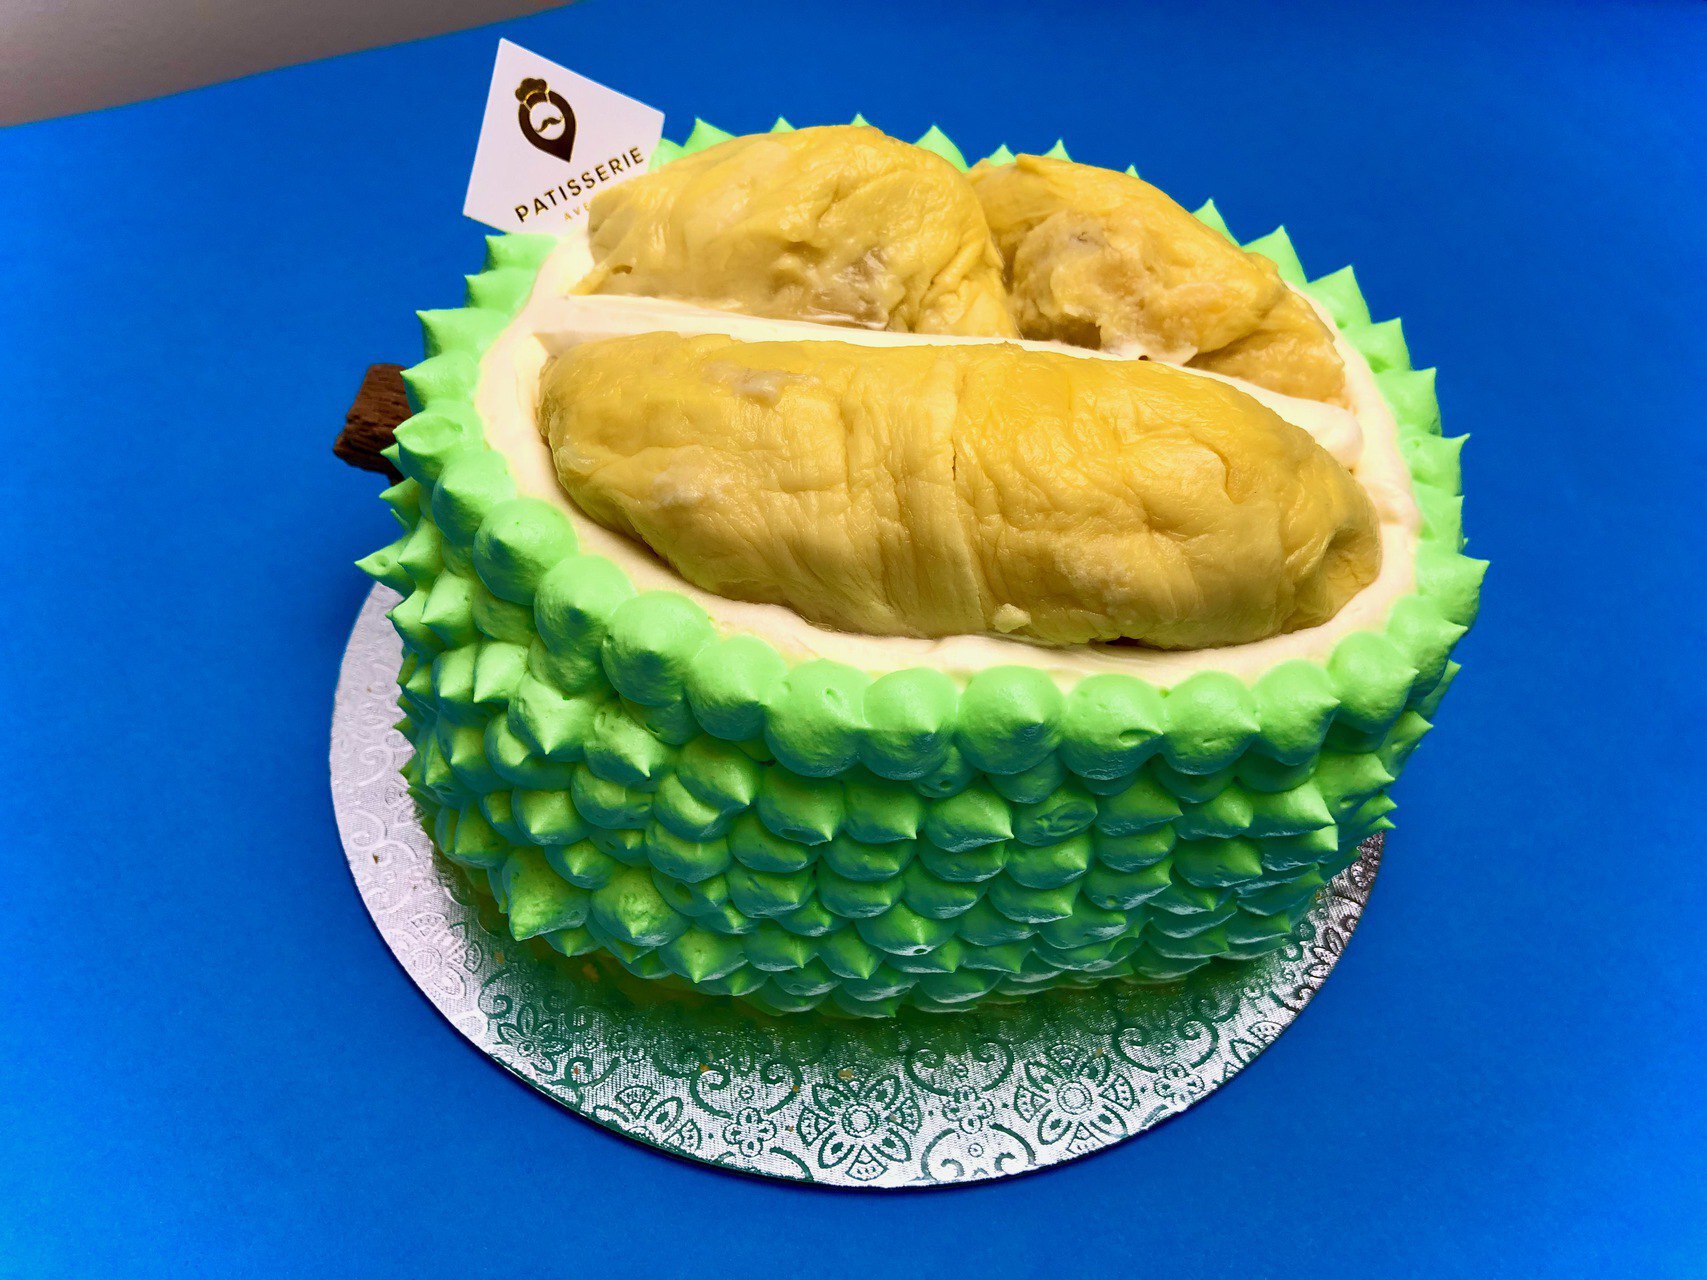 Premium Musang King Durian Mille Crepe Cake | Tip Top Durian | Malaysia Top  Fresh Durian Online Delivery